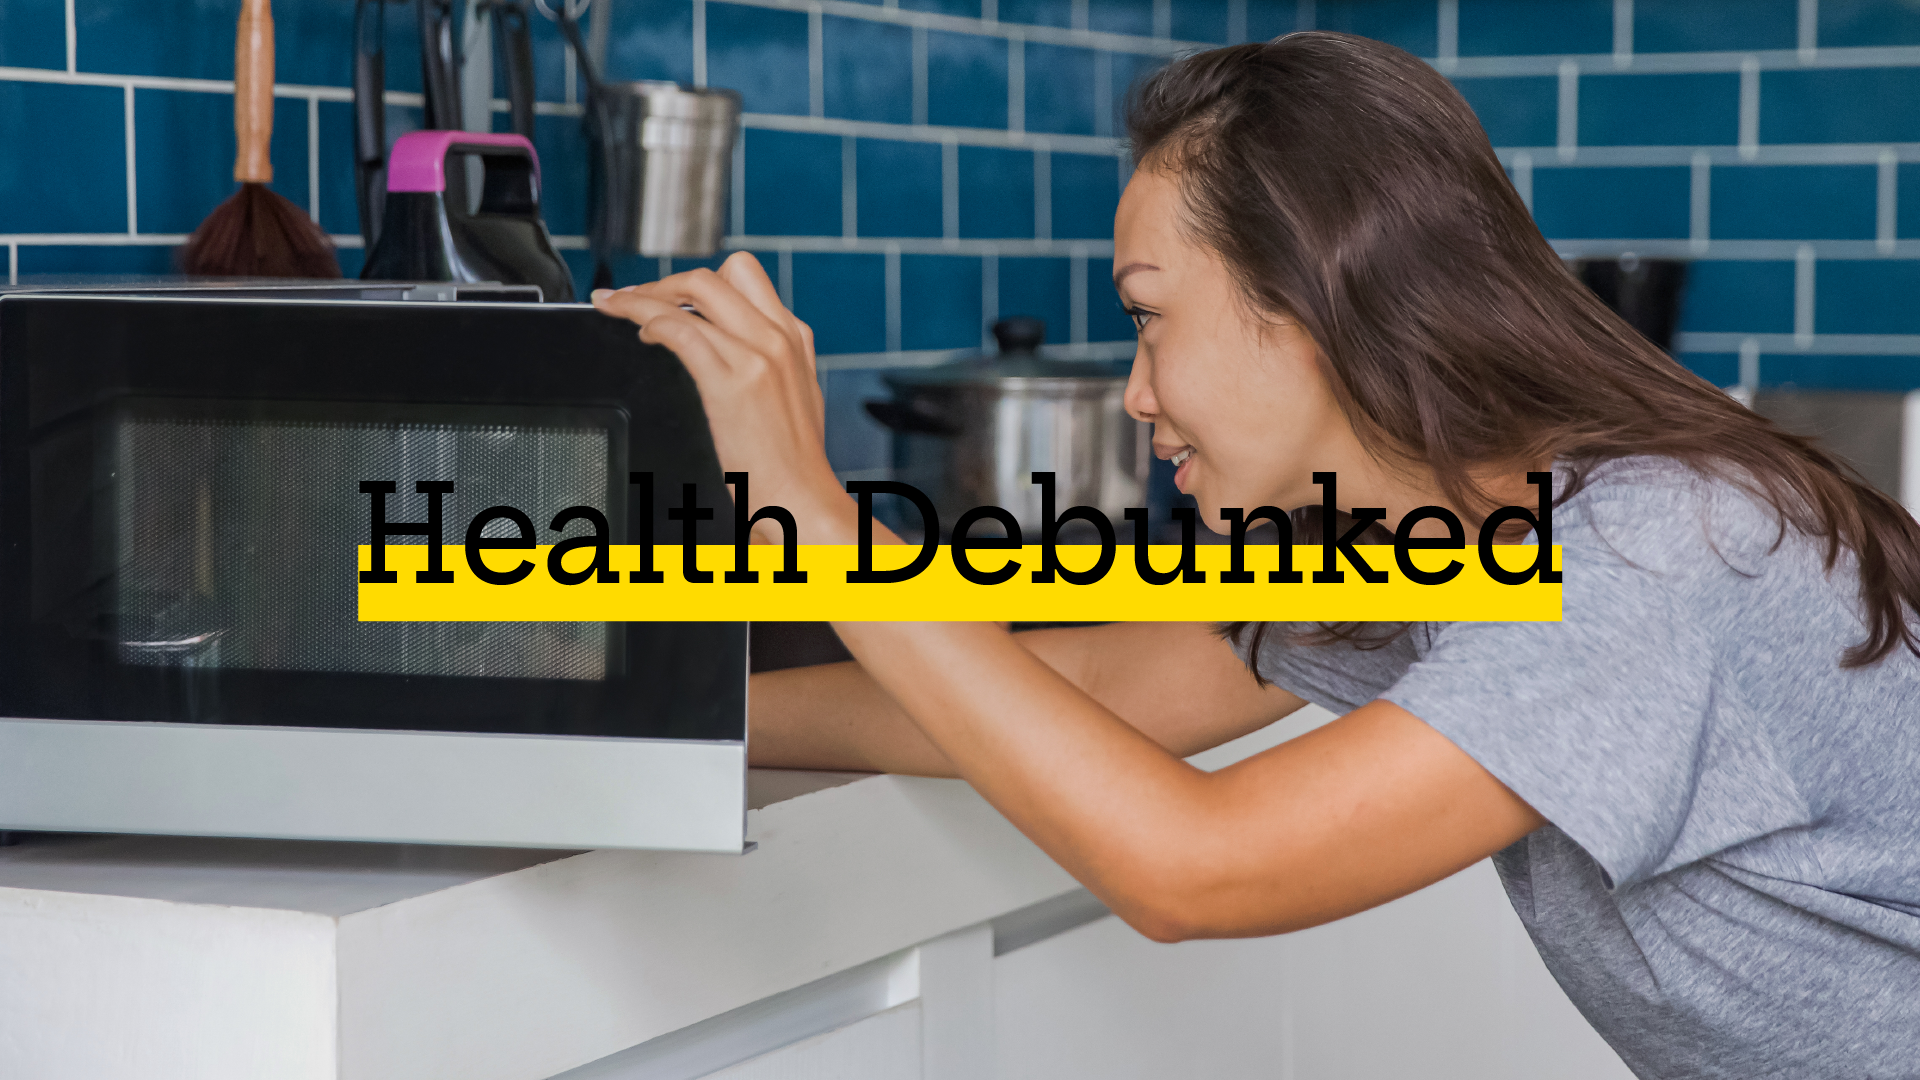 Do Microwaves Actually Lower Your Nutrients in Food